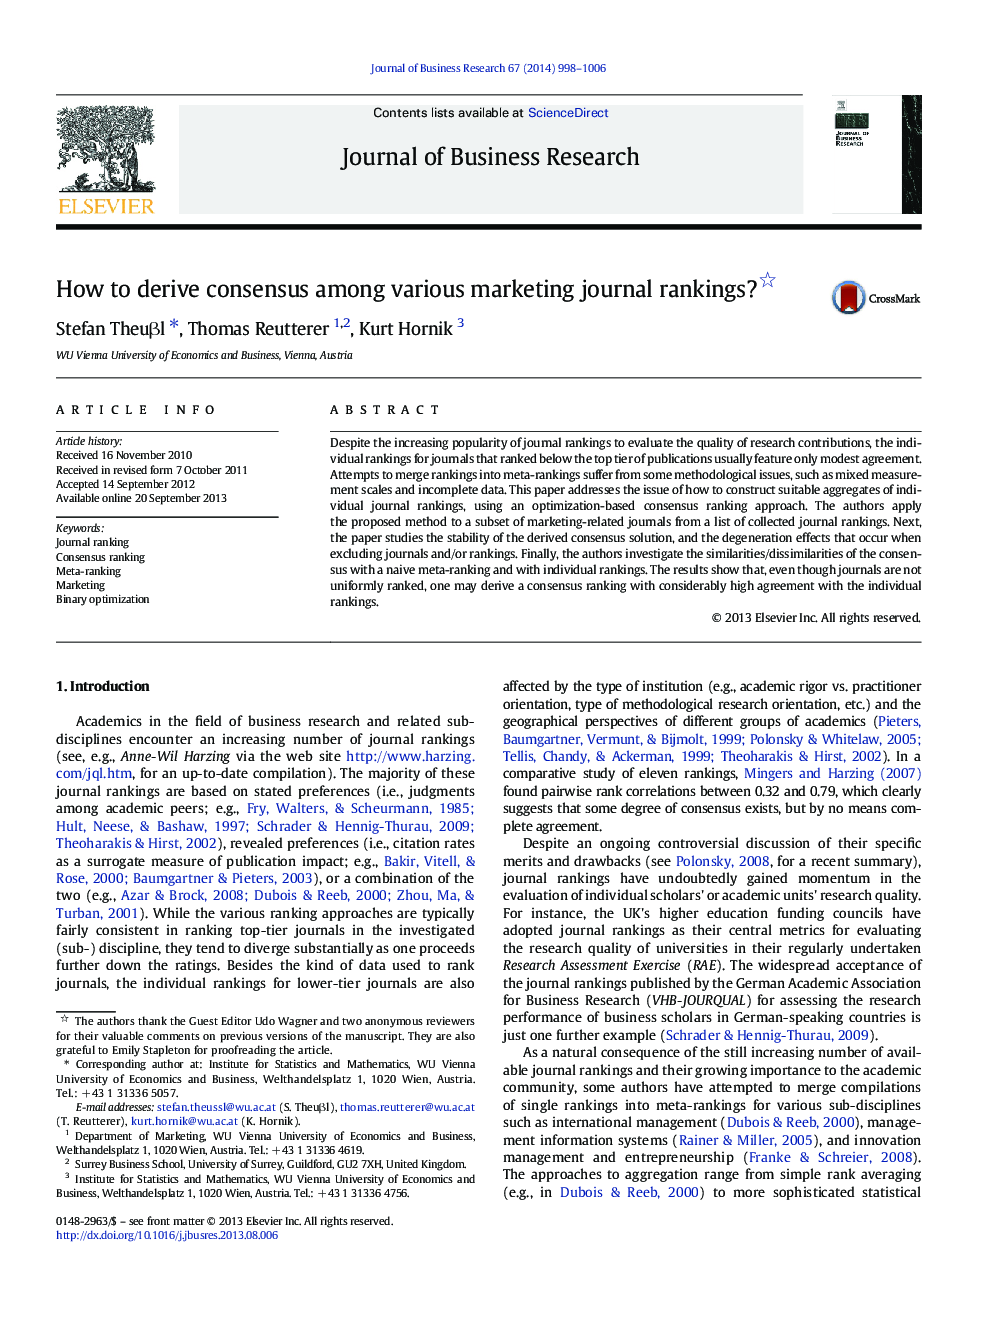 How to derive consensus among various marketing journal rankings? 